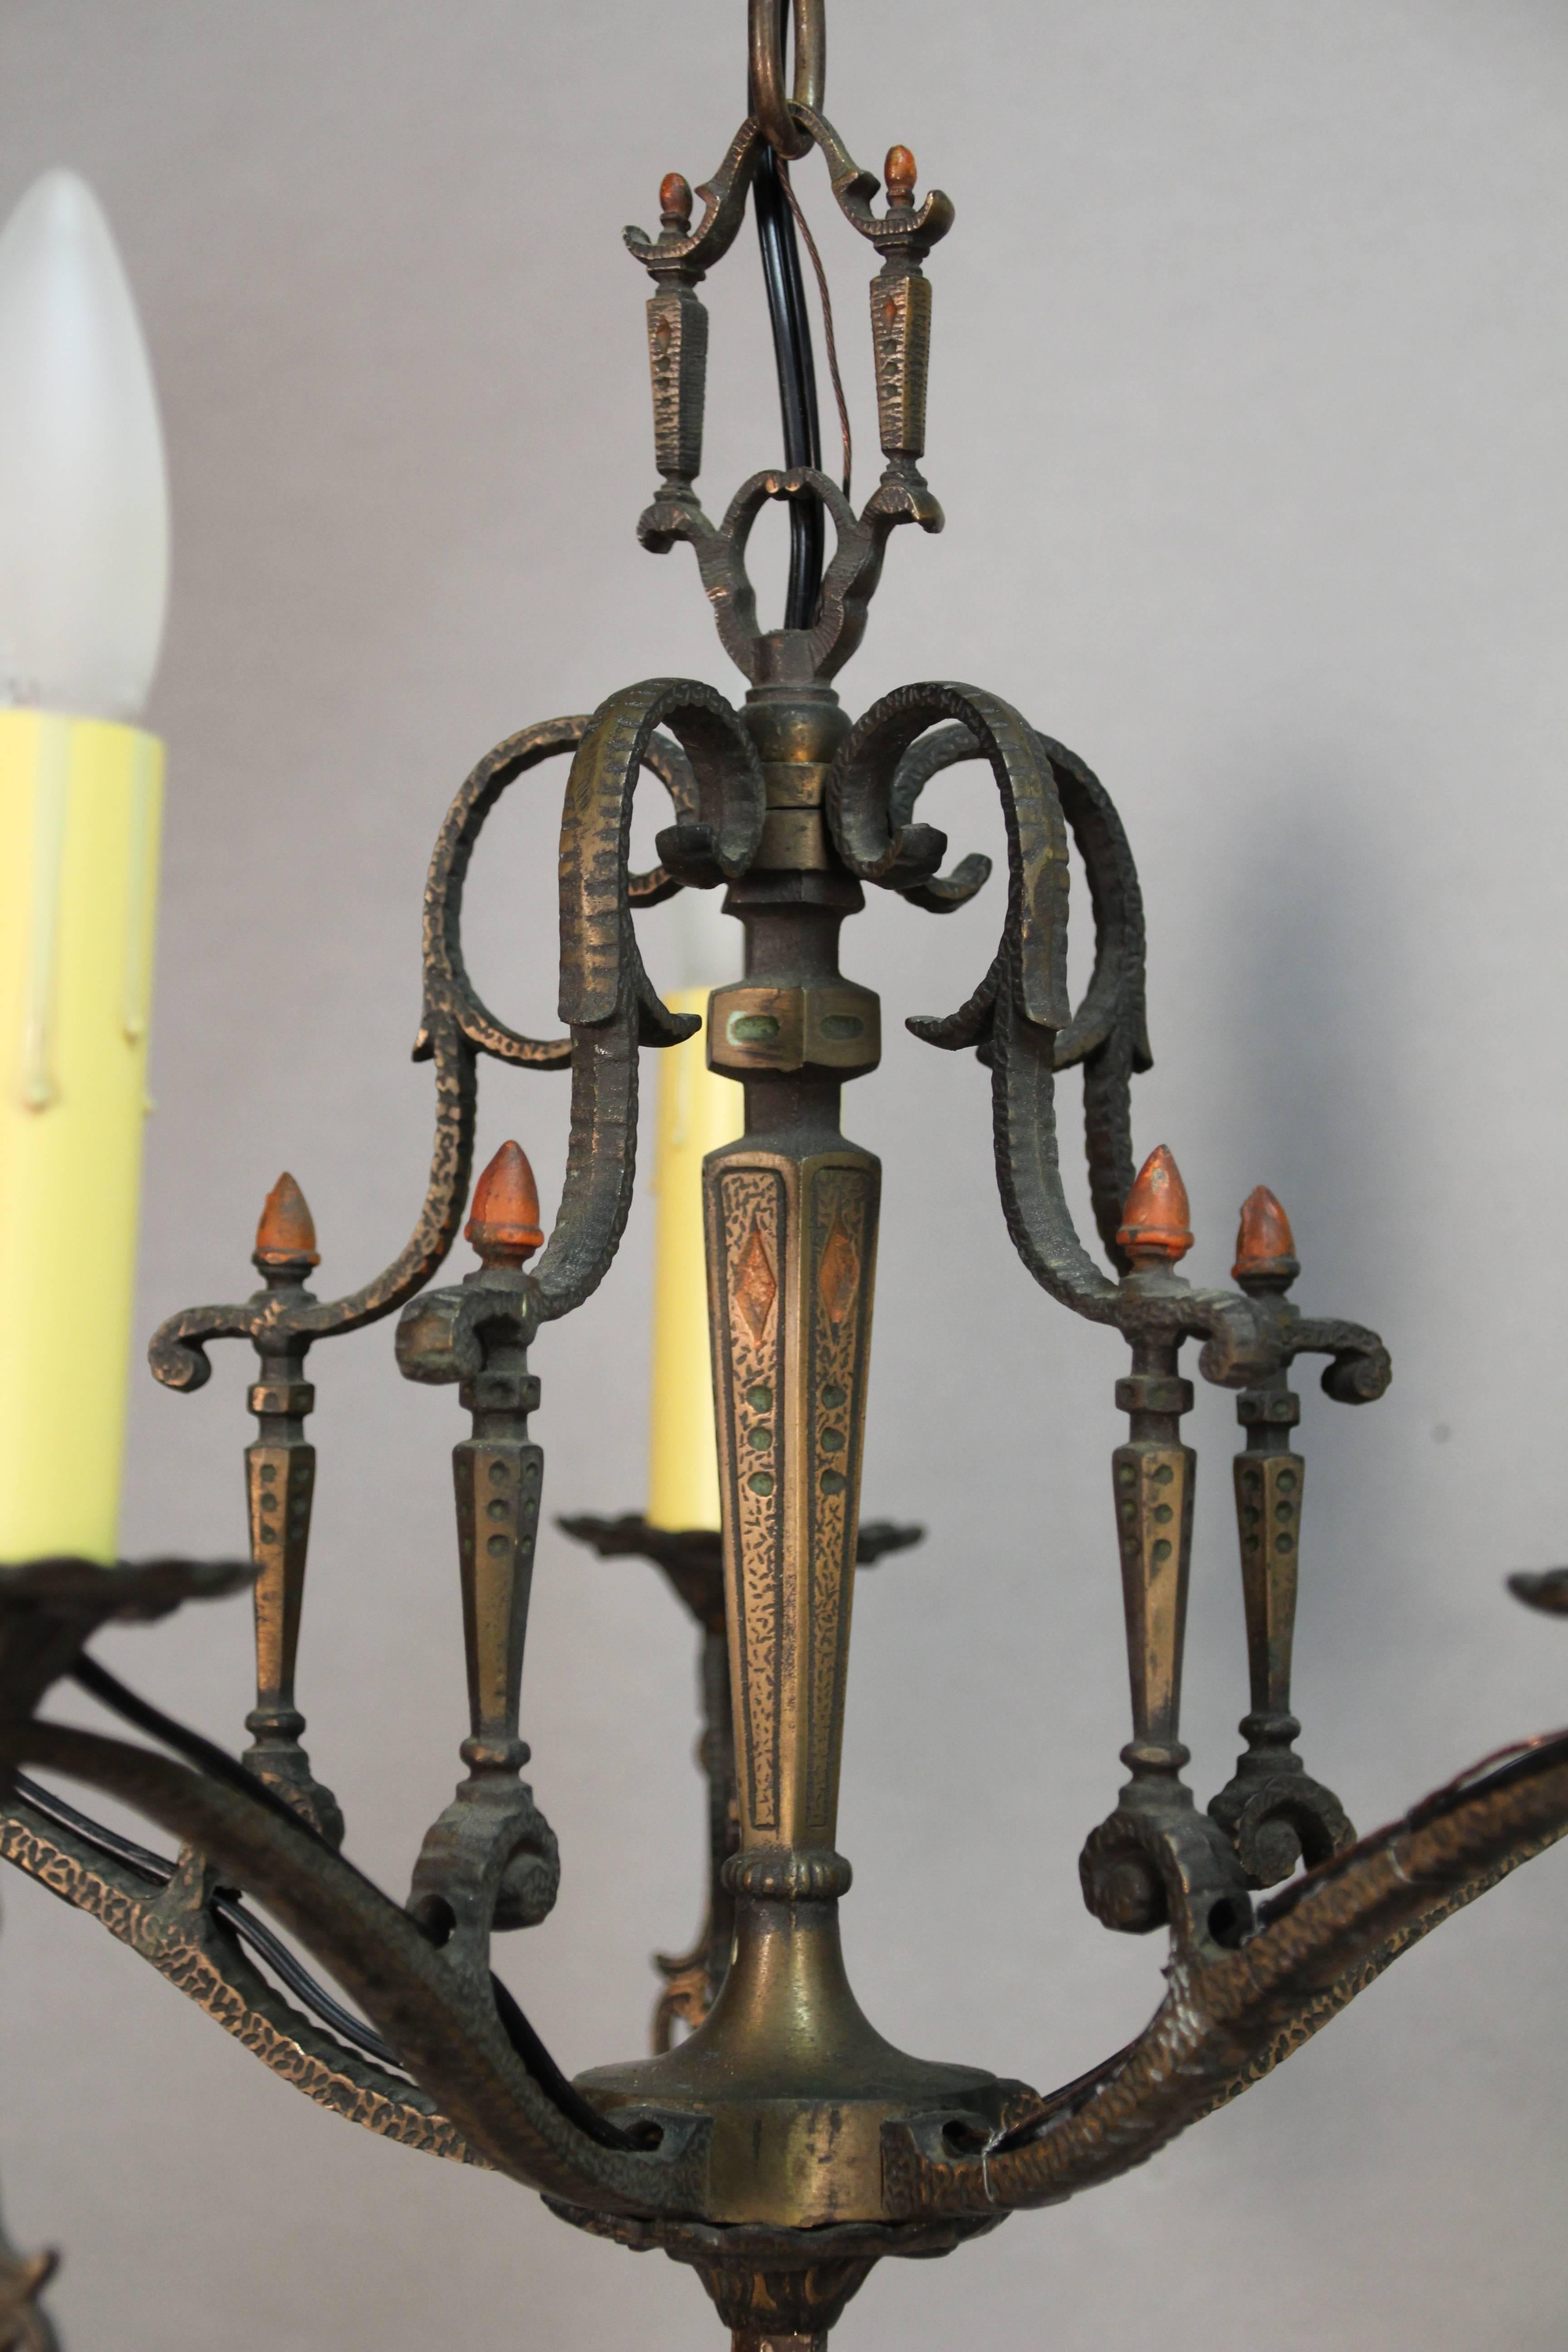 Attractive compact five-light Spanish Revival chandelier.